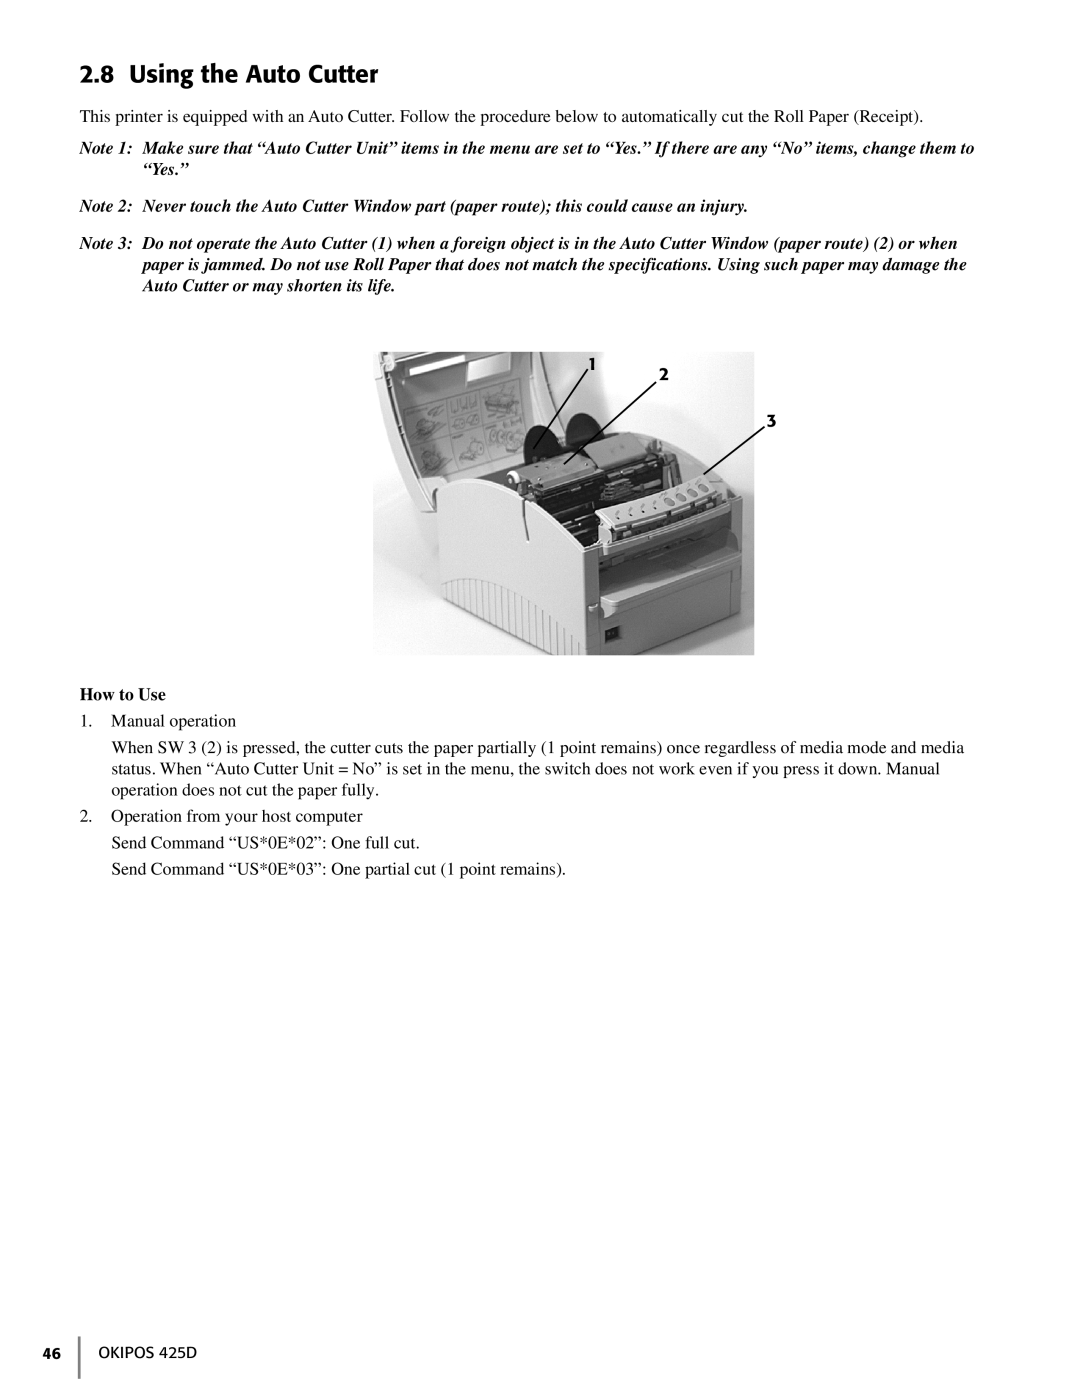 Oki 425D manual Using the Auto Cutter, How to Use 